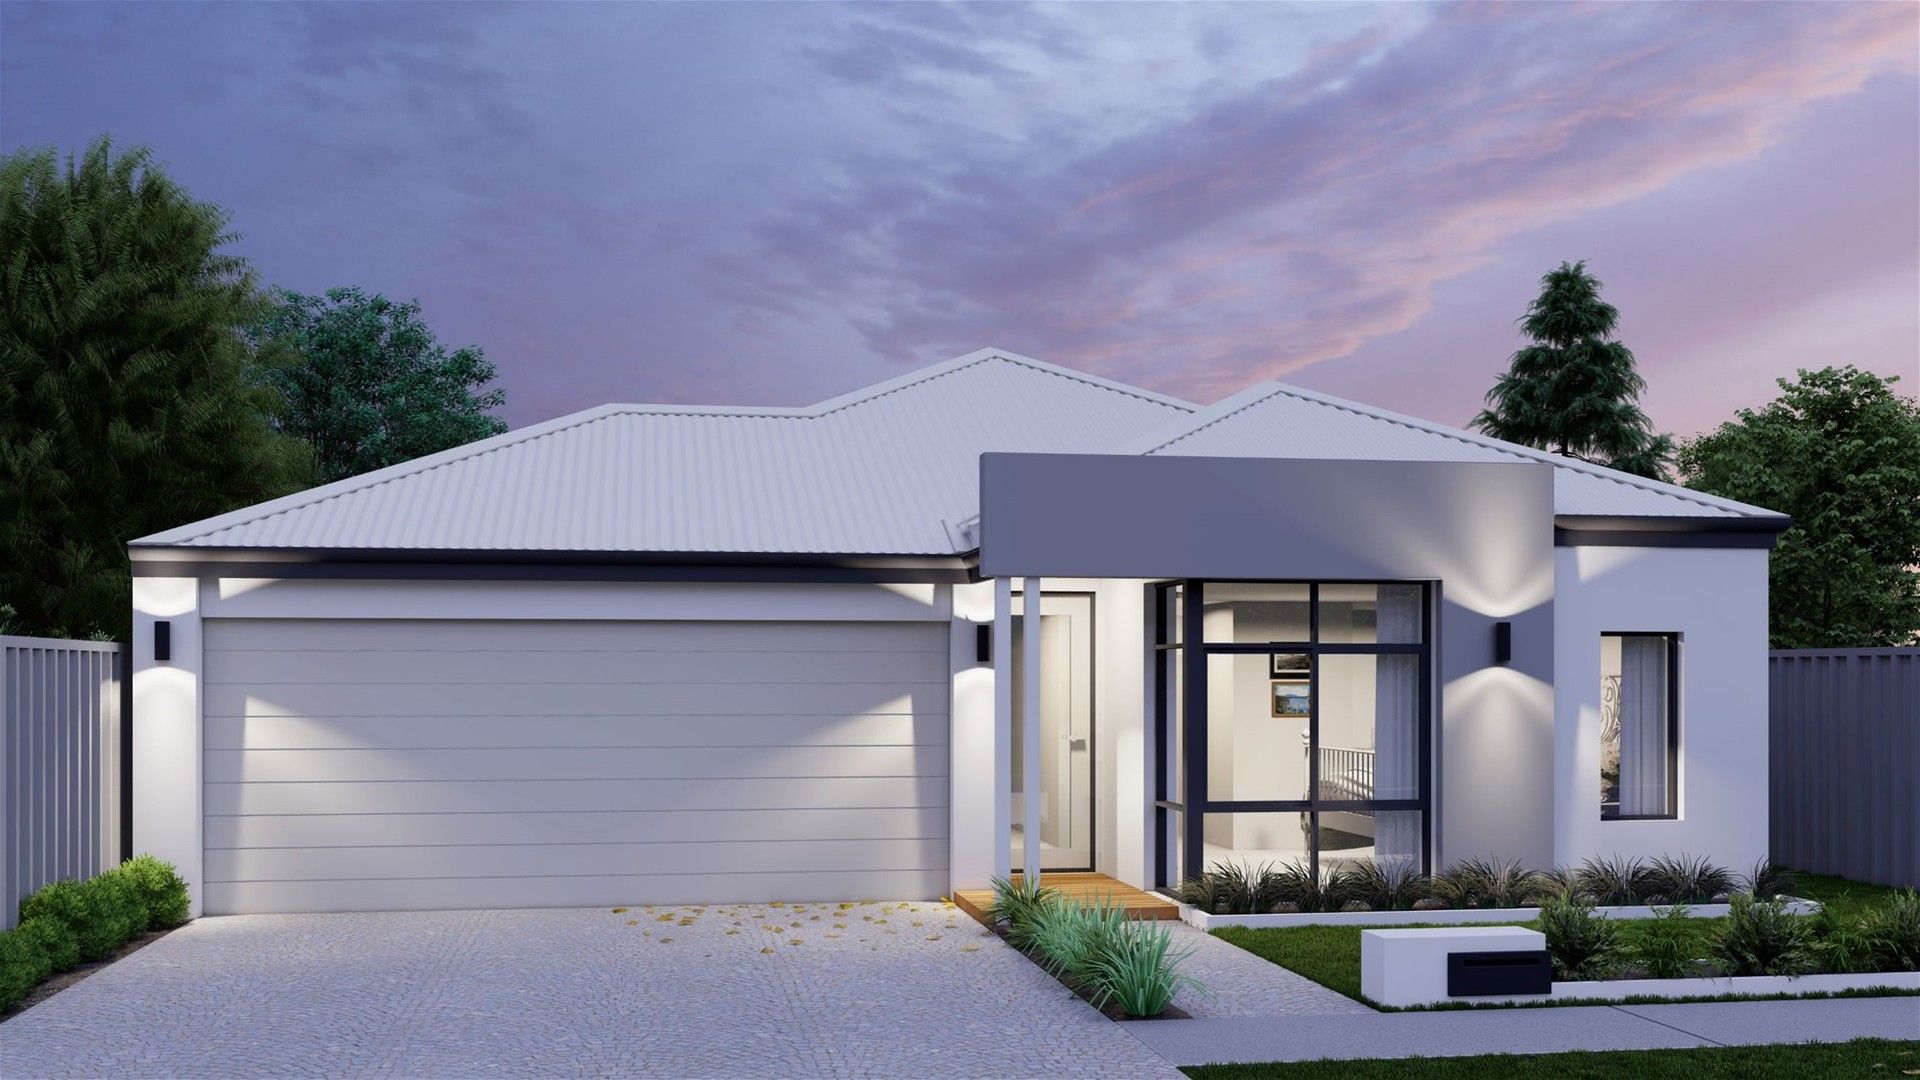 4 bedrooms New House & Land in  GOLDEN BAY WA, 6174